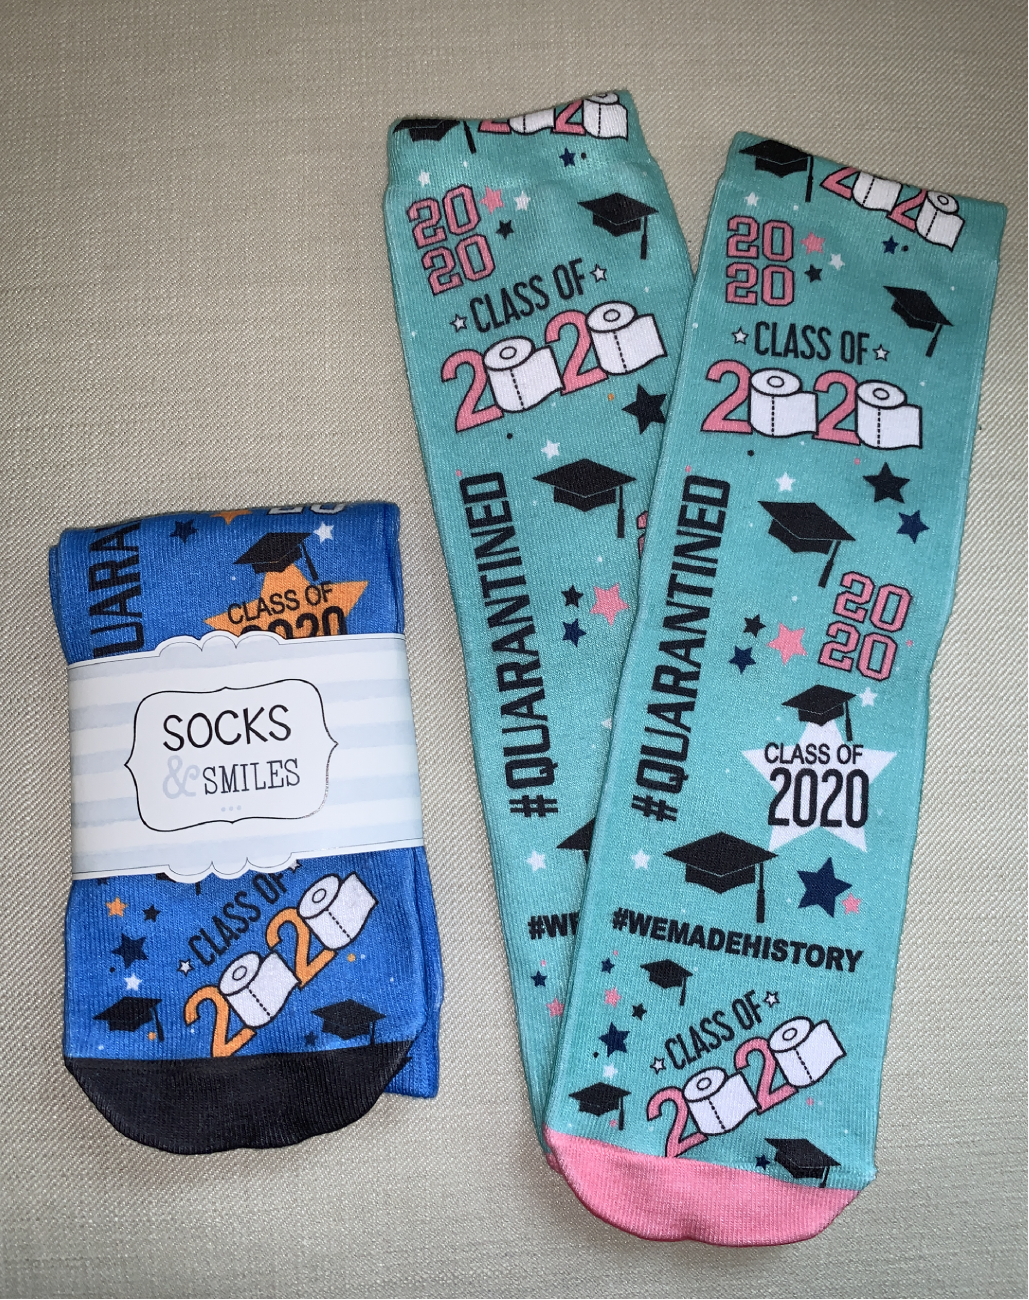 These silly graduation socks include a light-hearted nod to the 2020 TP shortage that, like it 